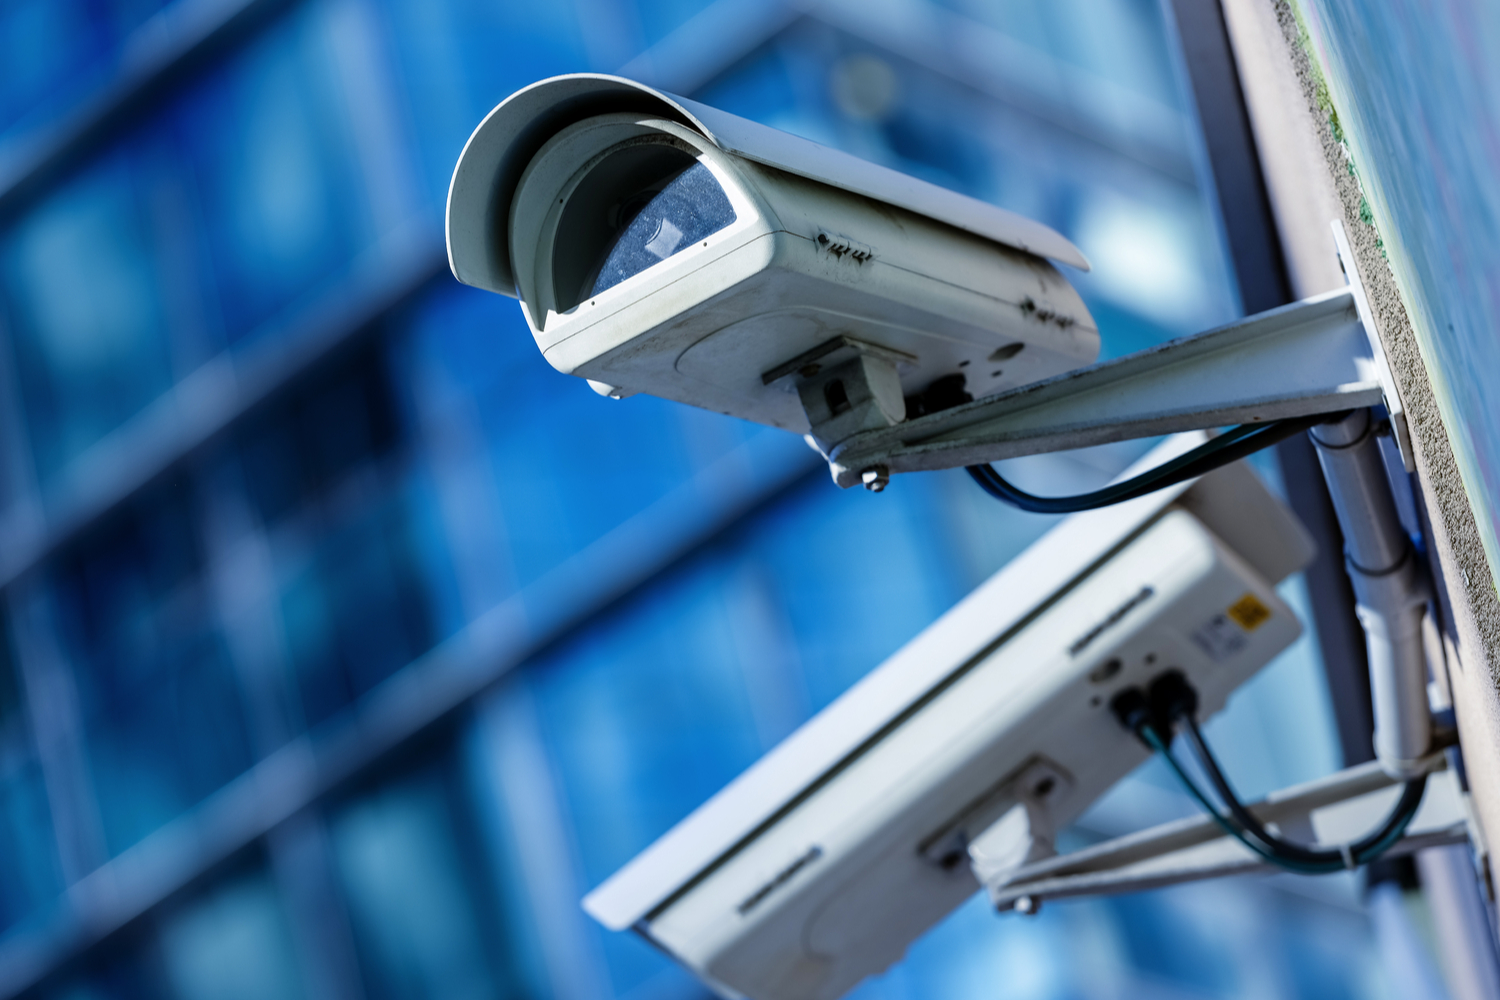 Moscow-may-sell-footage-from-public-security-cameras:-report